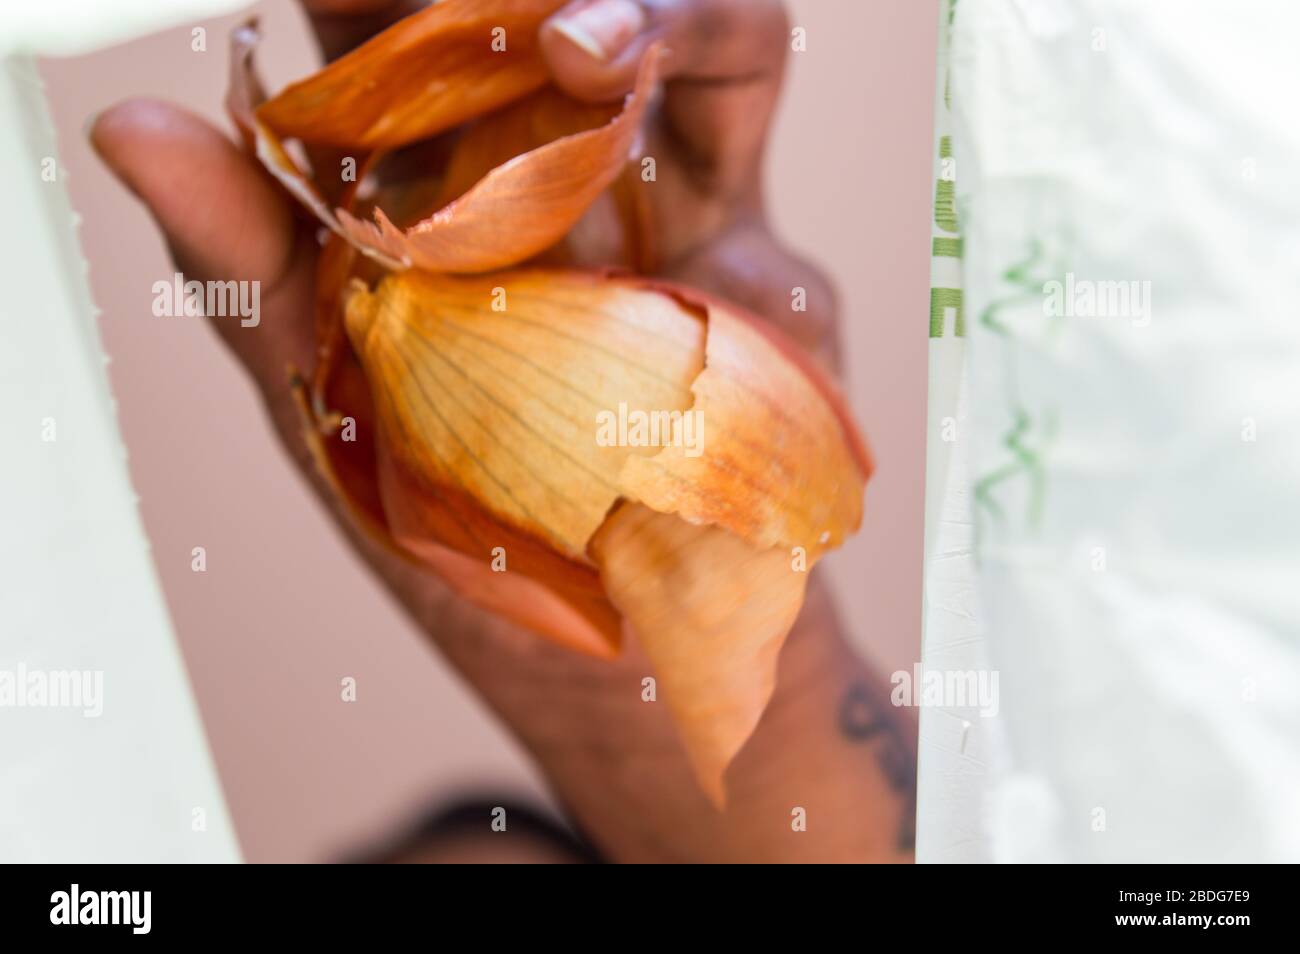 Lady throwing food waste into bin bag view from inside Stock Photo